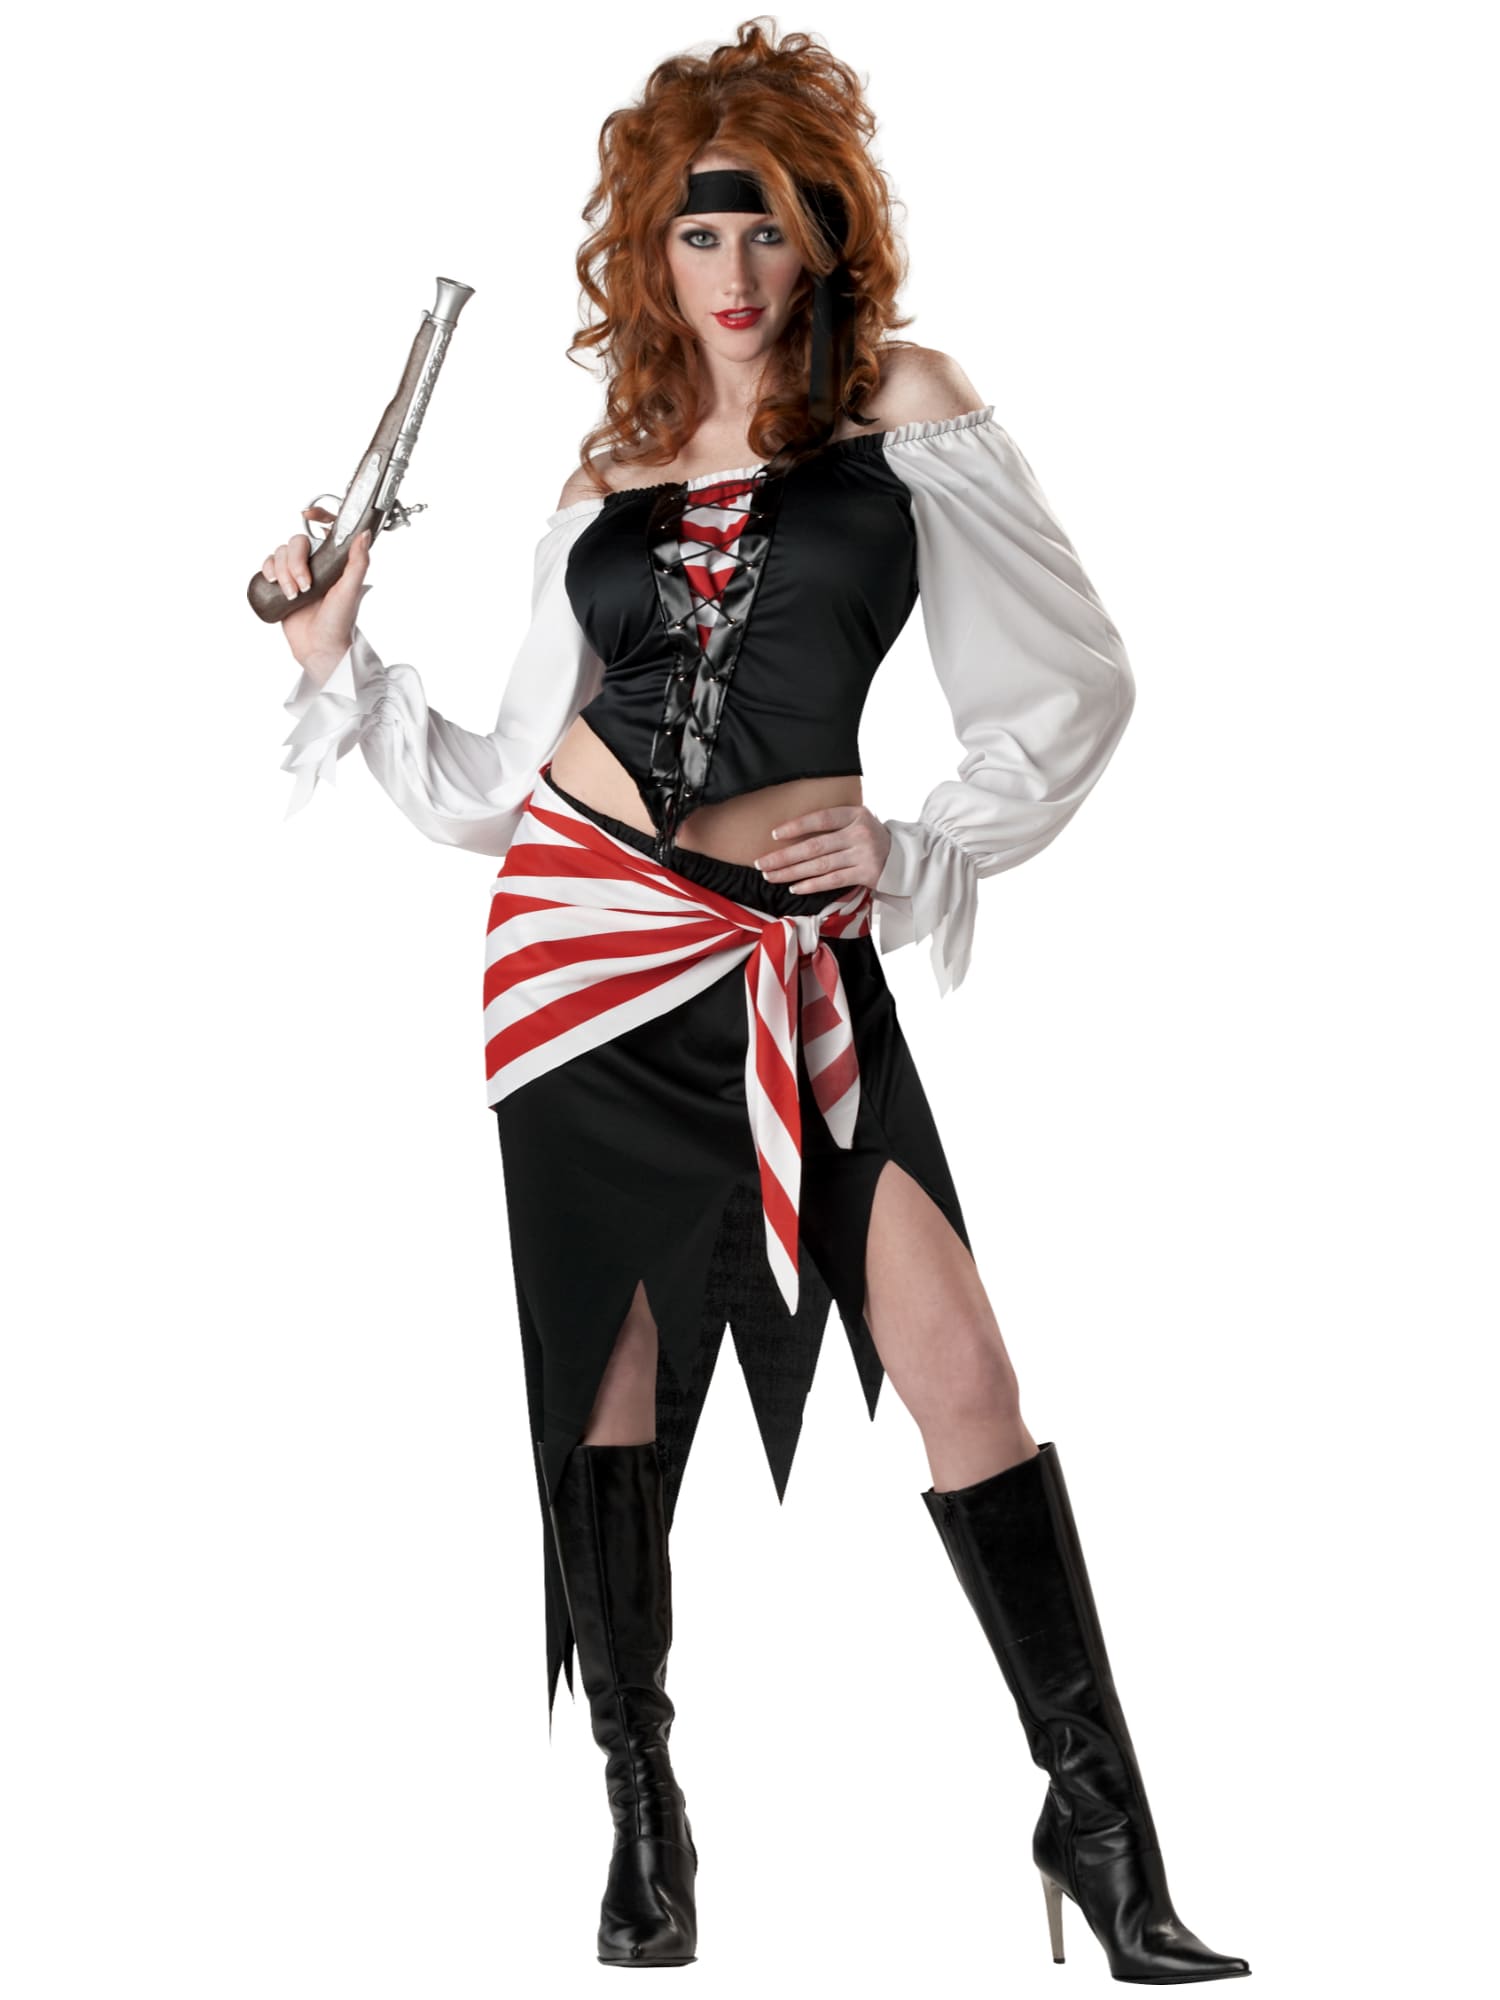 Hobbypos Ruby The Pirate Beauty Carribbean Women Costume